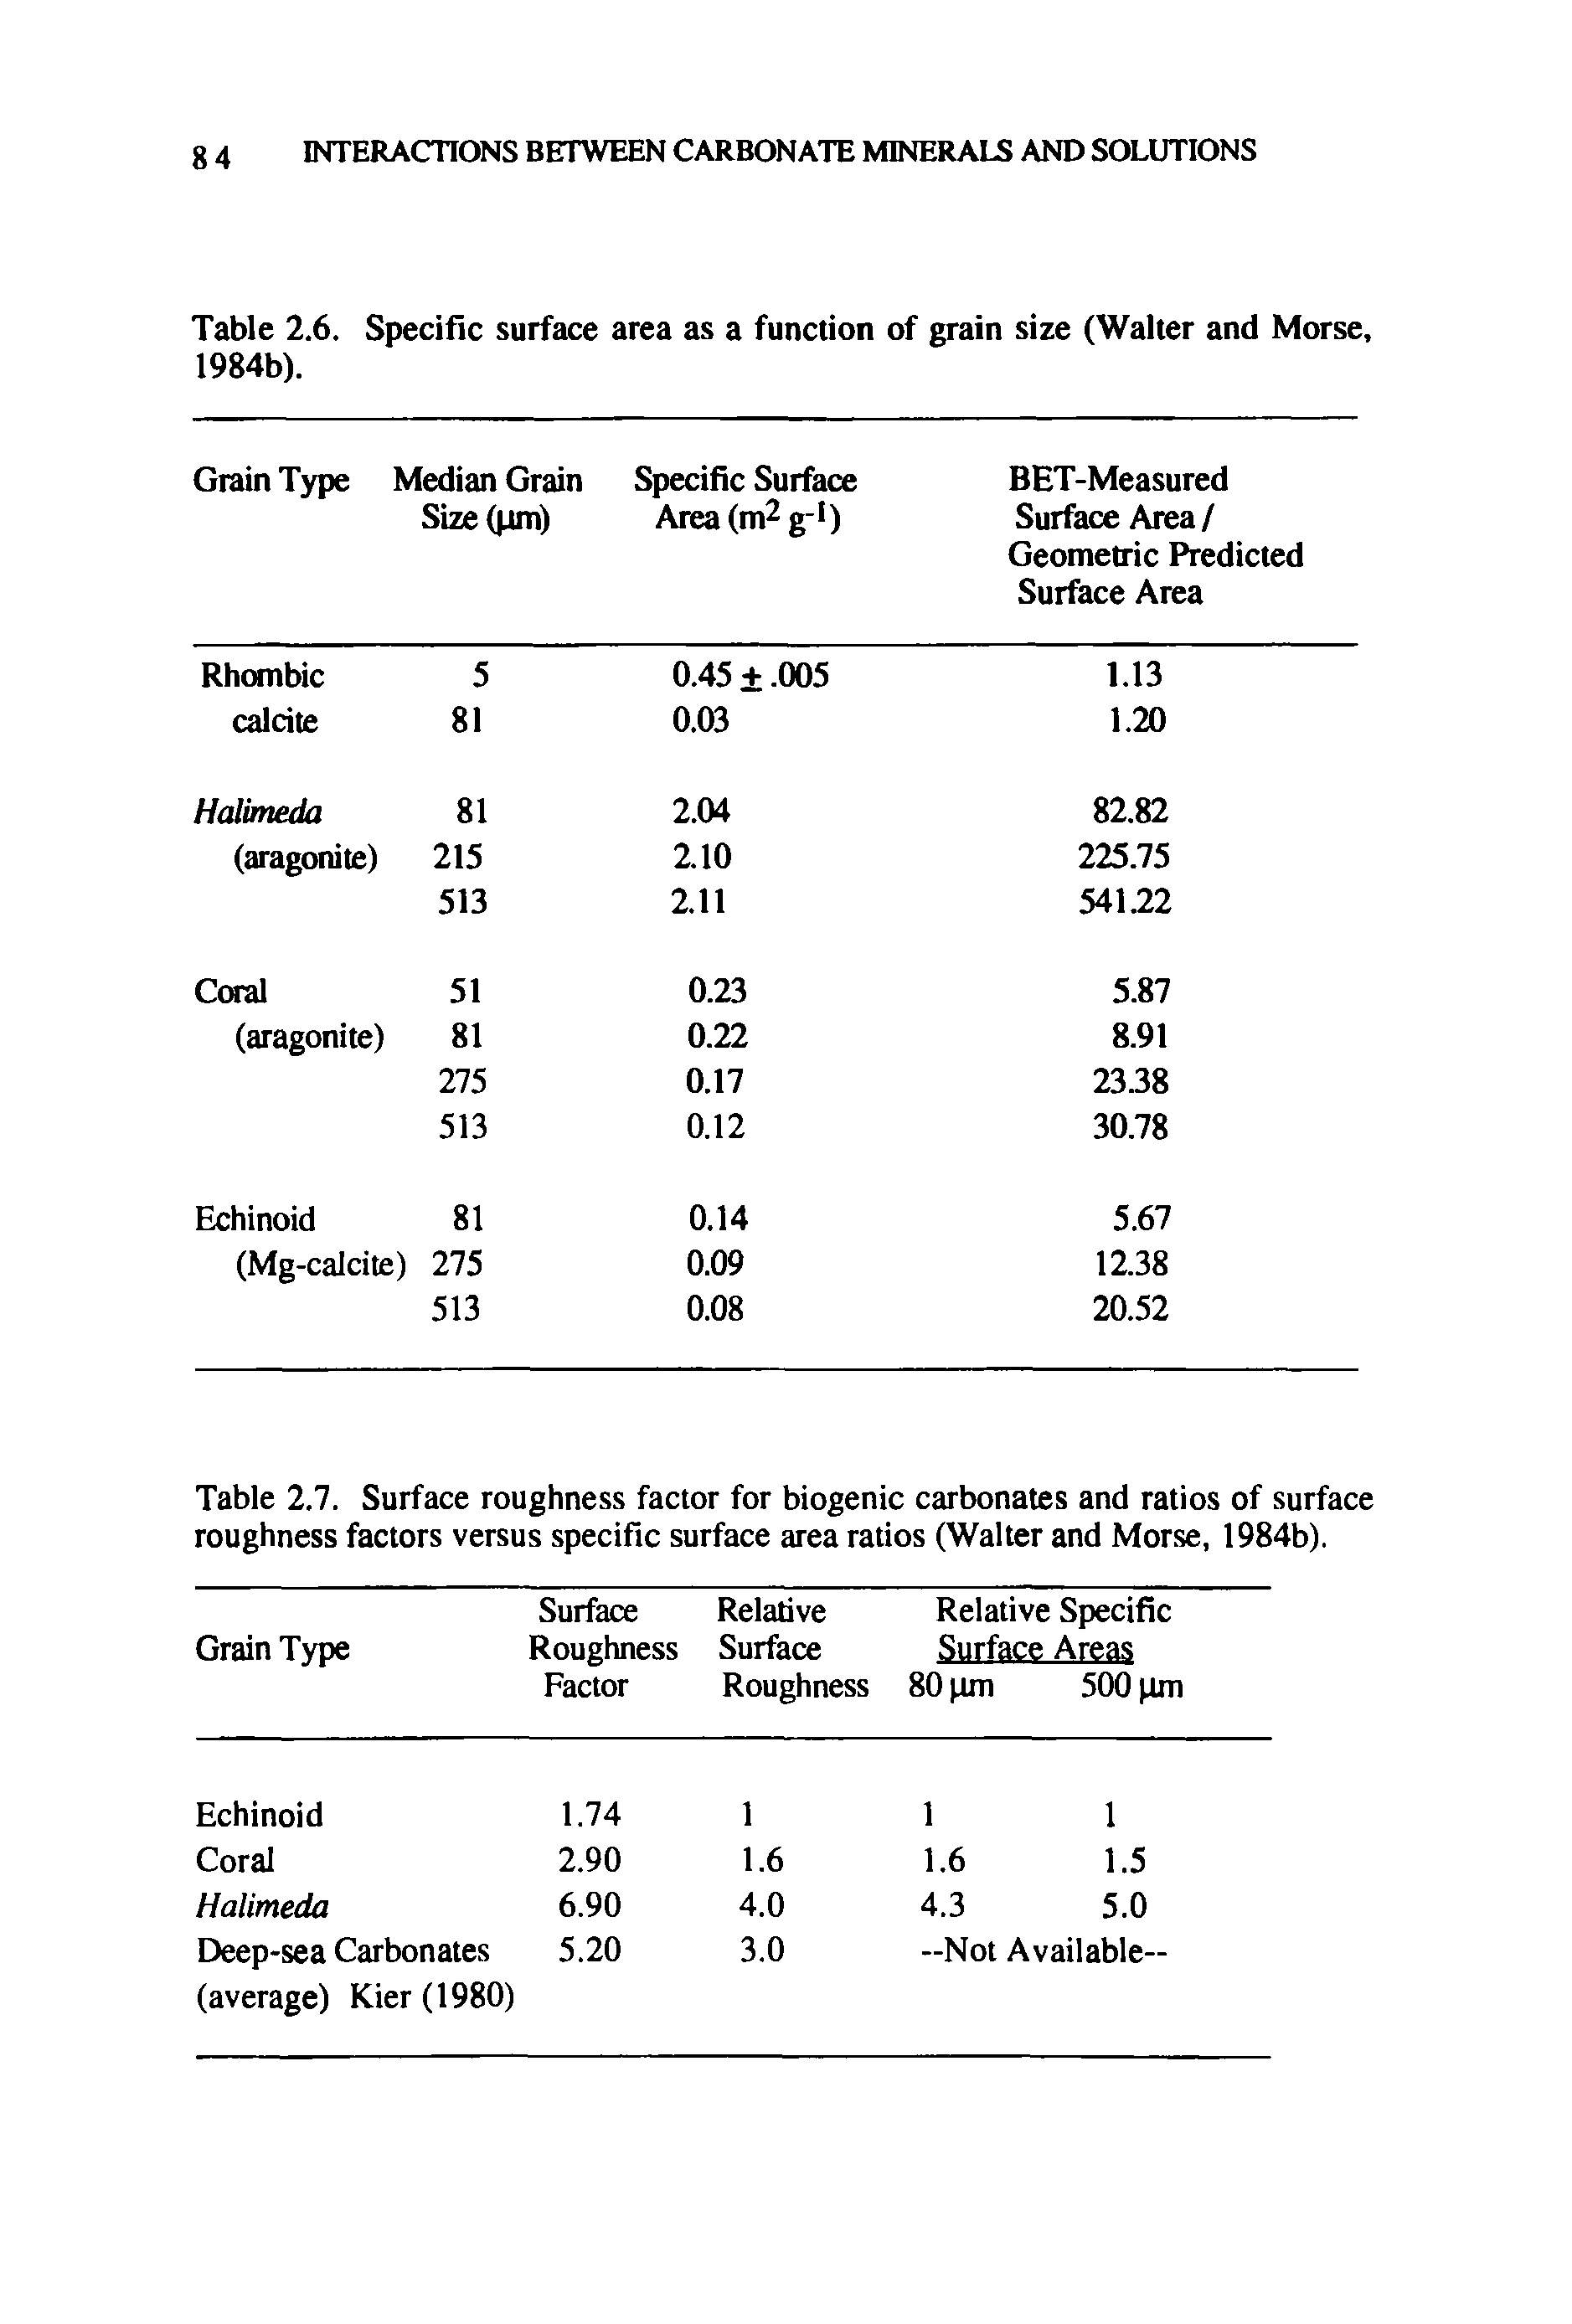 Table 2.7. Surface roughness factor for biogenic carbonates and ratios of surface roughness factors versus specific surface area ratios (Walter and Morse, 1984b).